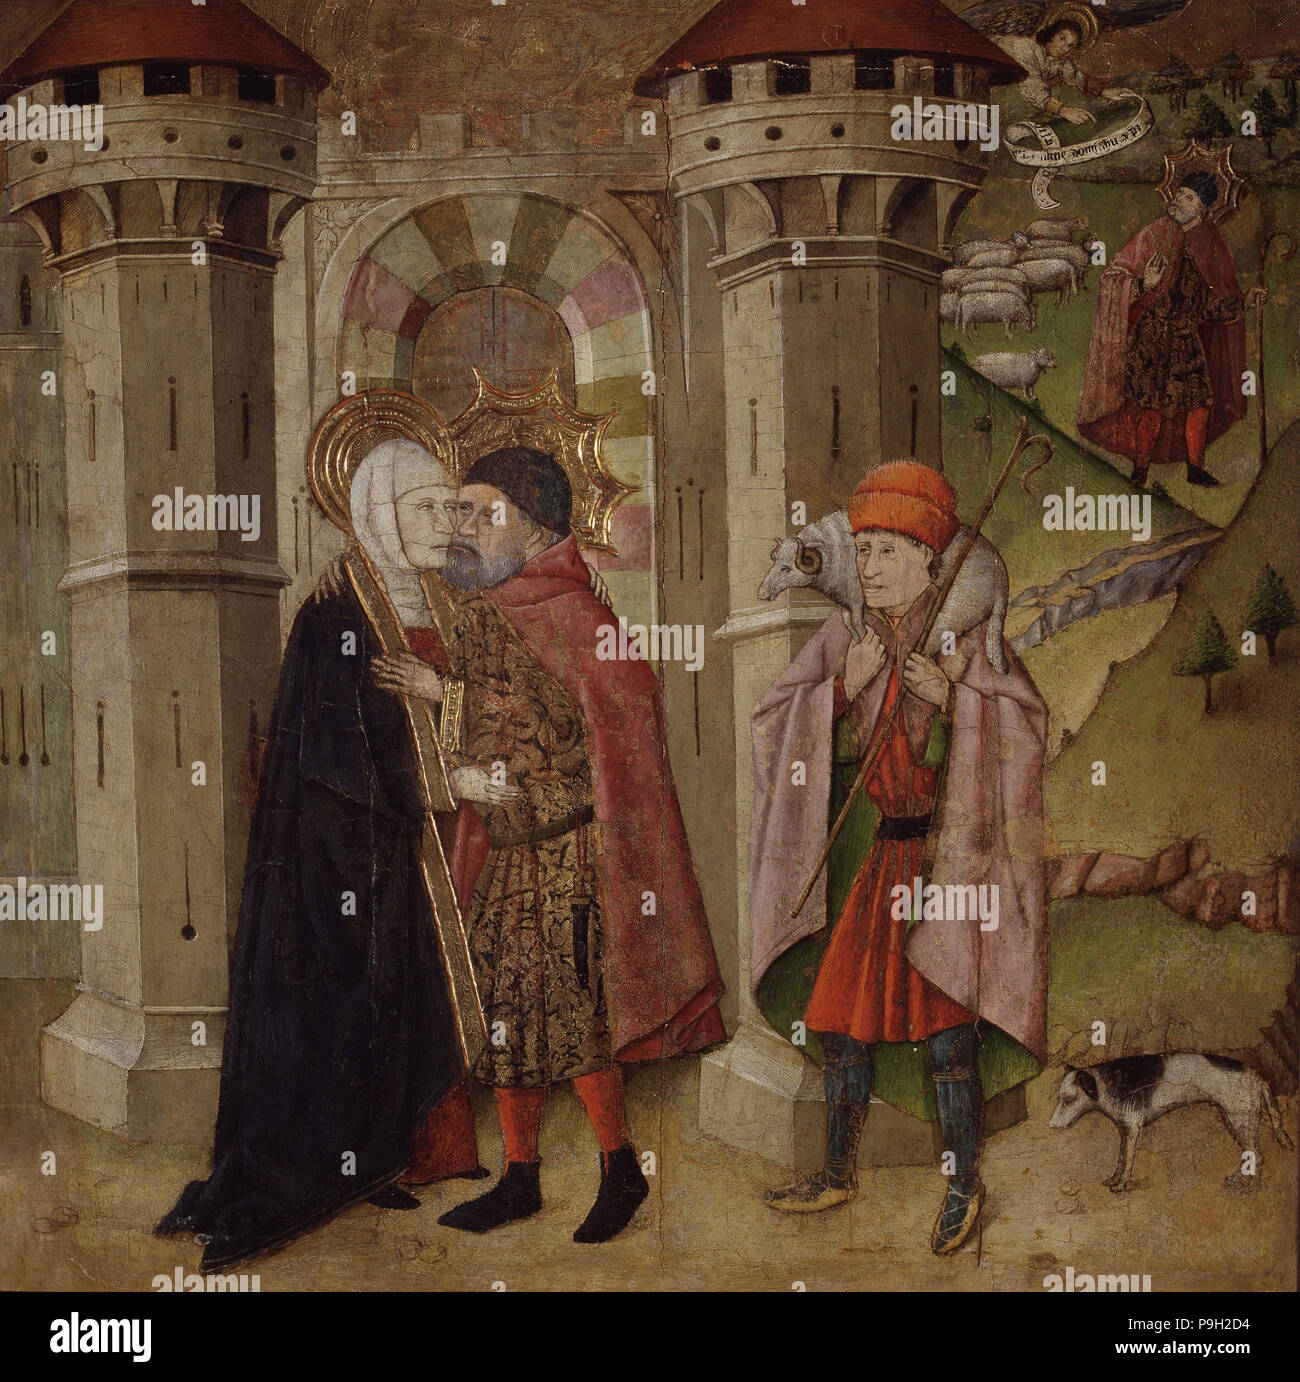 Saints Joachim and Anne before the sacred gate of Jerusalem', tempera painting work by Jaime Huguet. Stock Photo